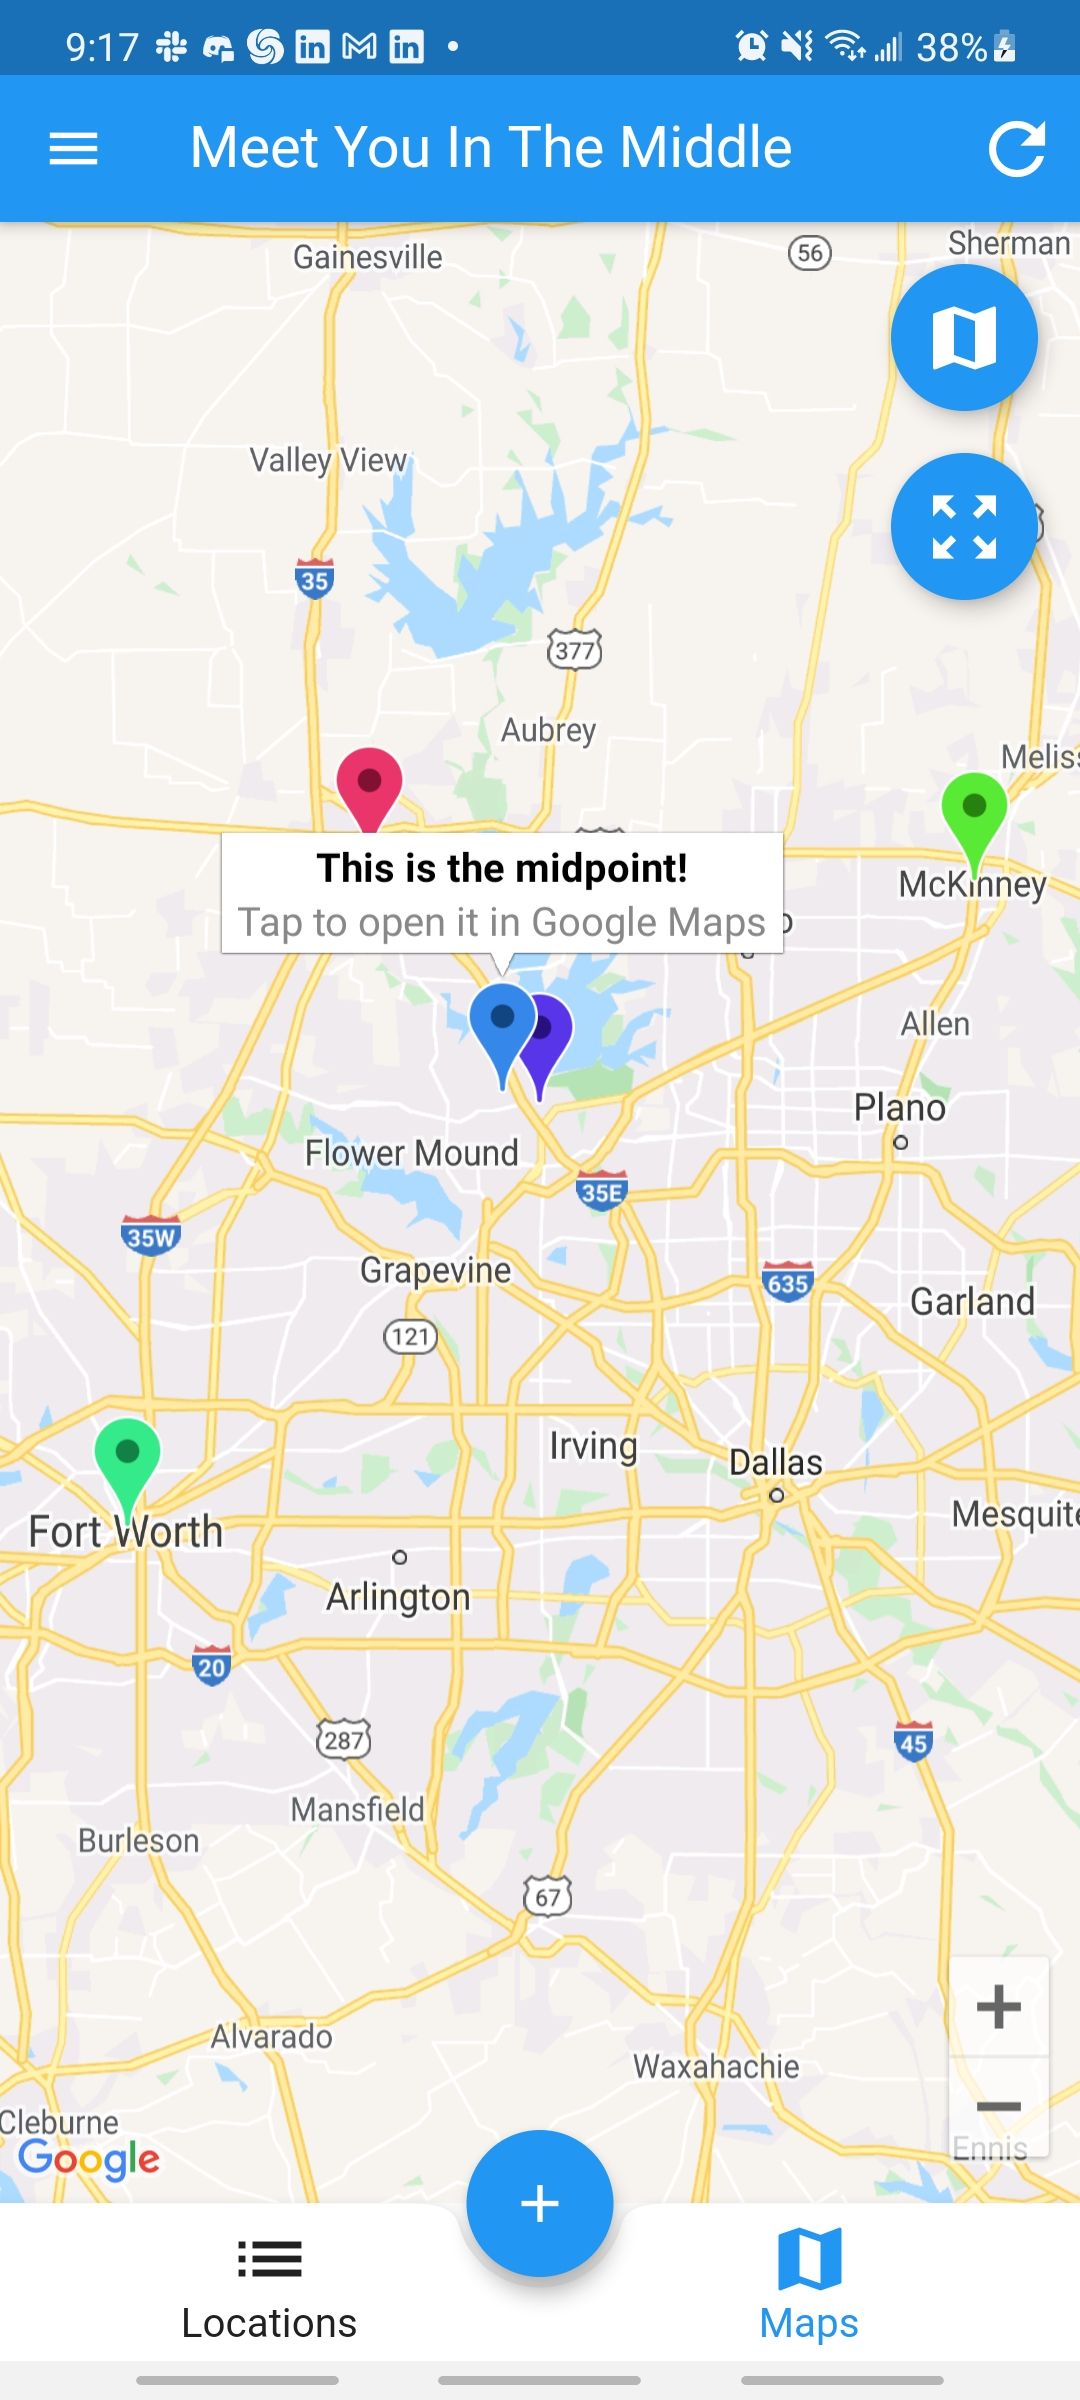 meet you in the middle app showing the midpoint between all cities